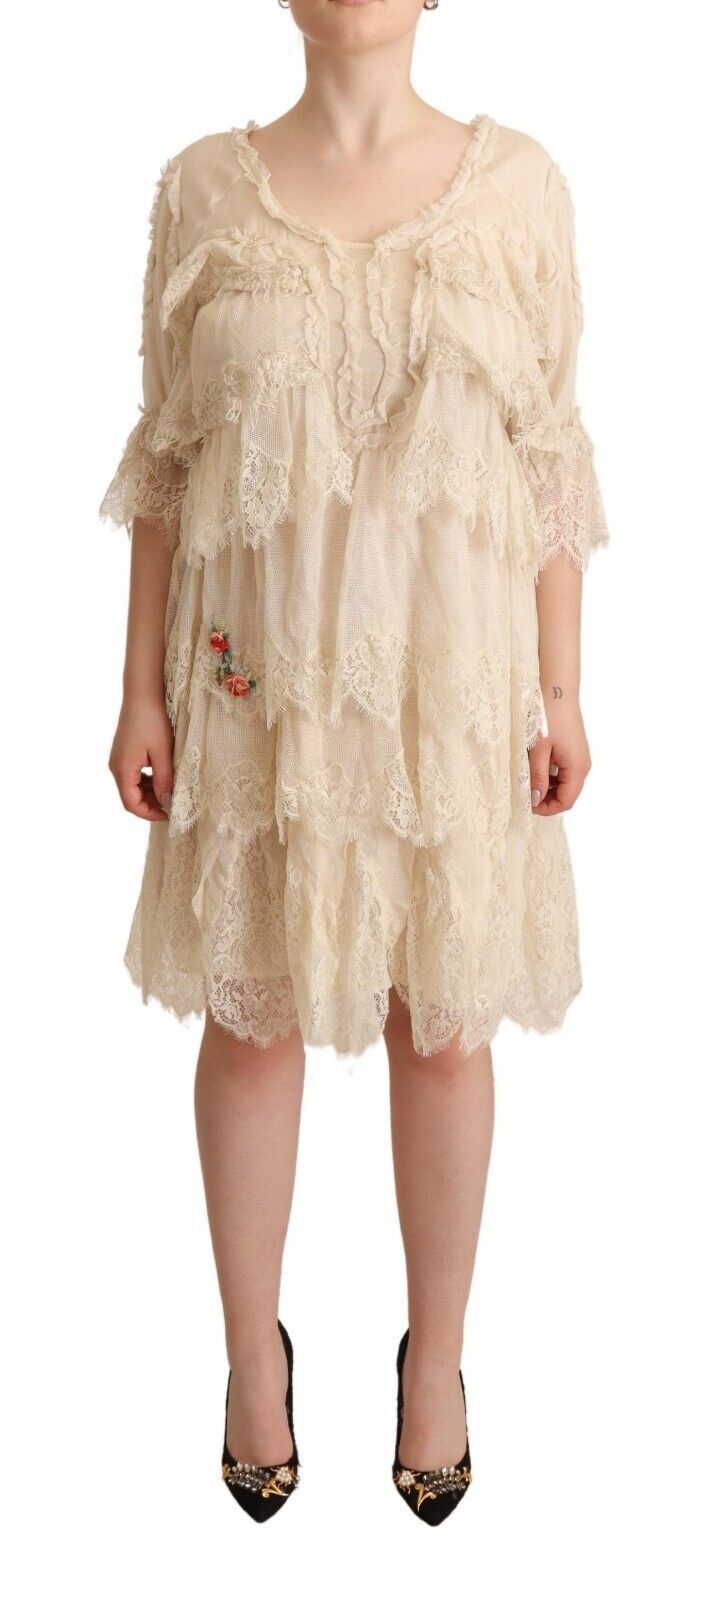 Beige 3/4 Sleeves Layered Lace Knee Length Dress